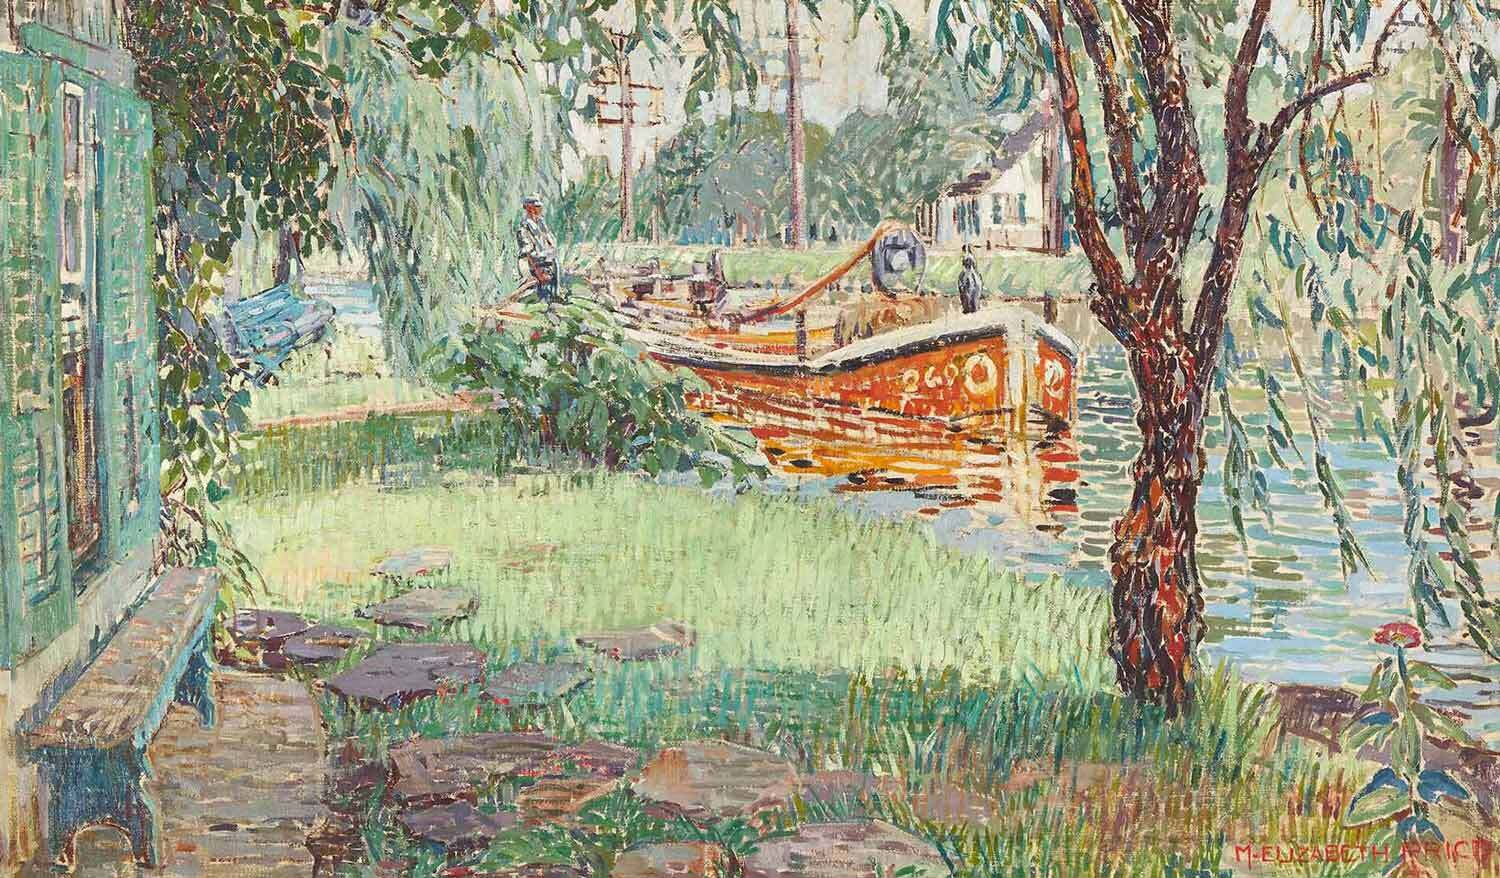 Your Guide to the Pennsylvania Impressionists